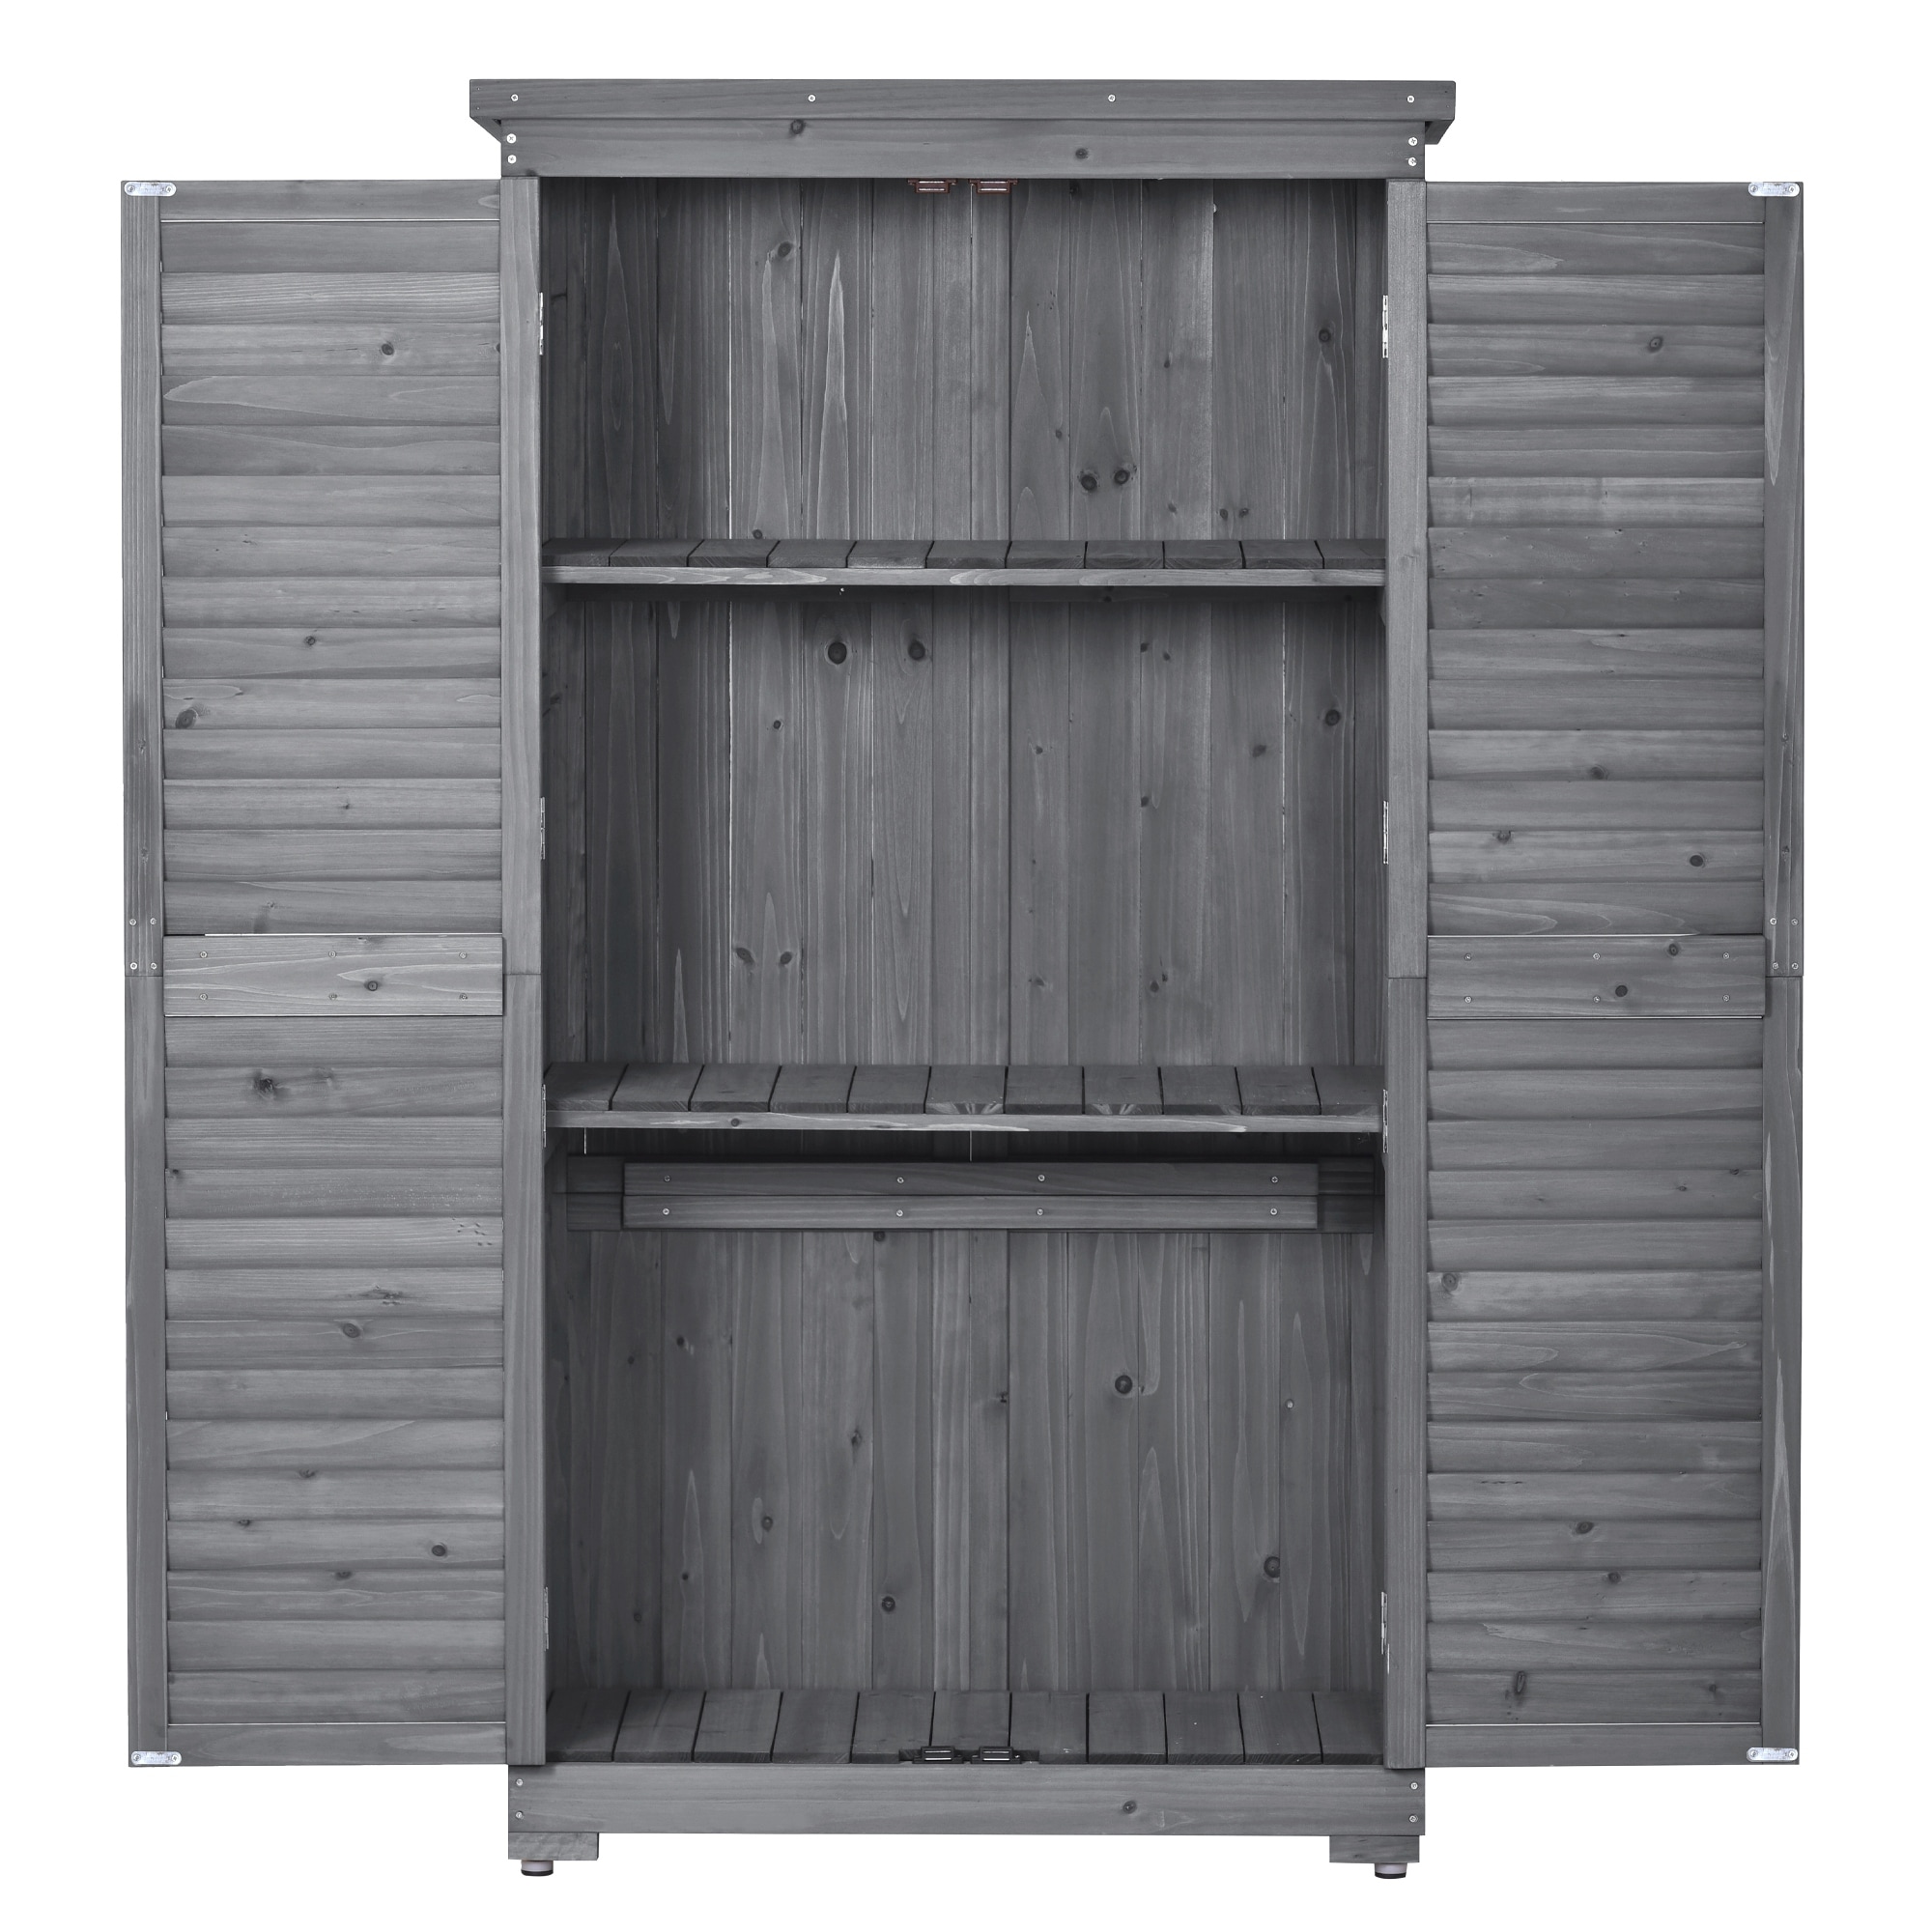 Wooden Garden Shed 3-tier Patio Storage Cabinet Outdoor Organizer Wooden Lockers with Fir Wood - Gray